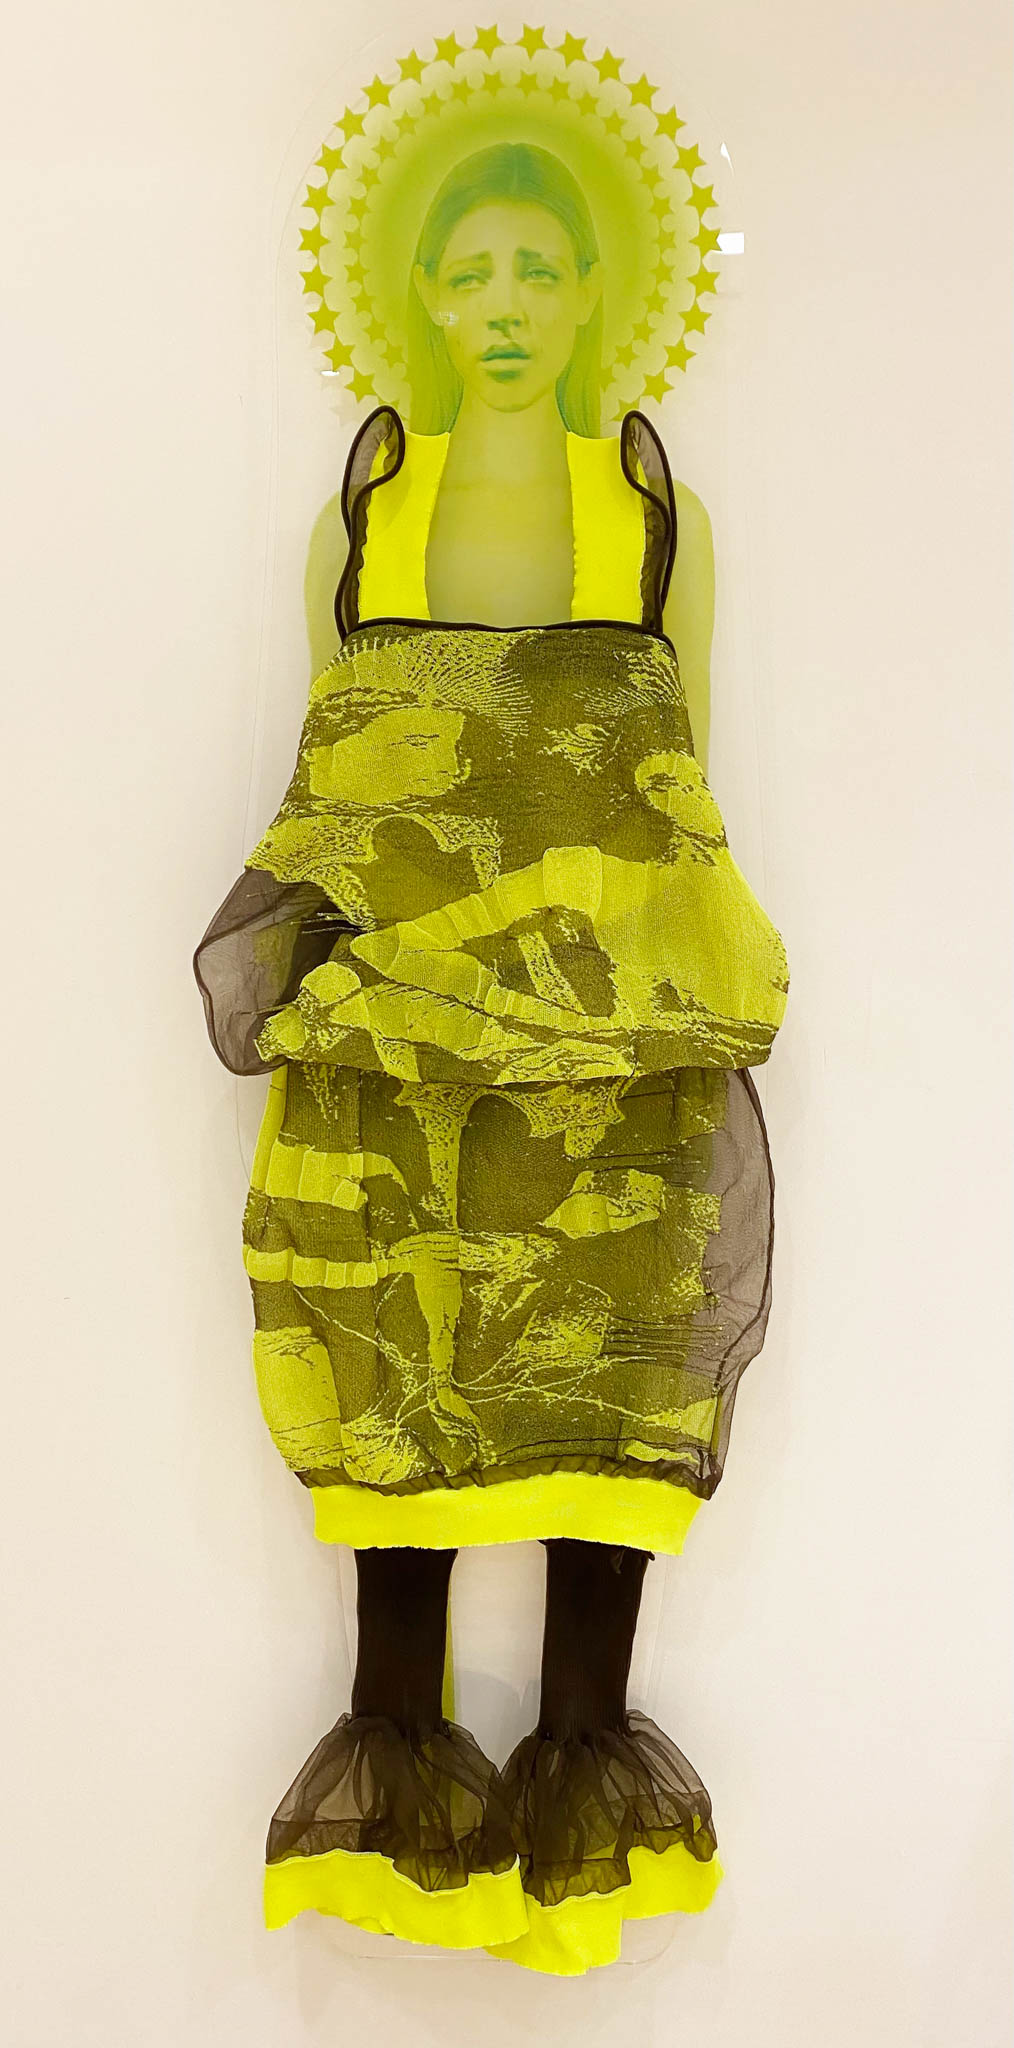 One neon green printed women wearing a ruffled dark grey and neon yellow garment from the Veiling Veronicas series. The piece is mounted to a white wall as if it's floating.